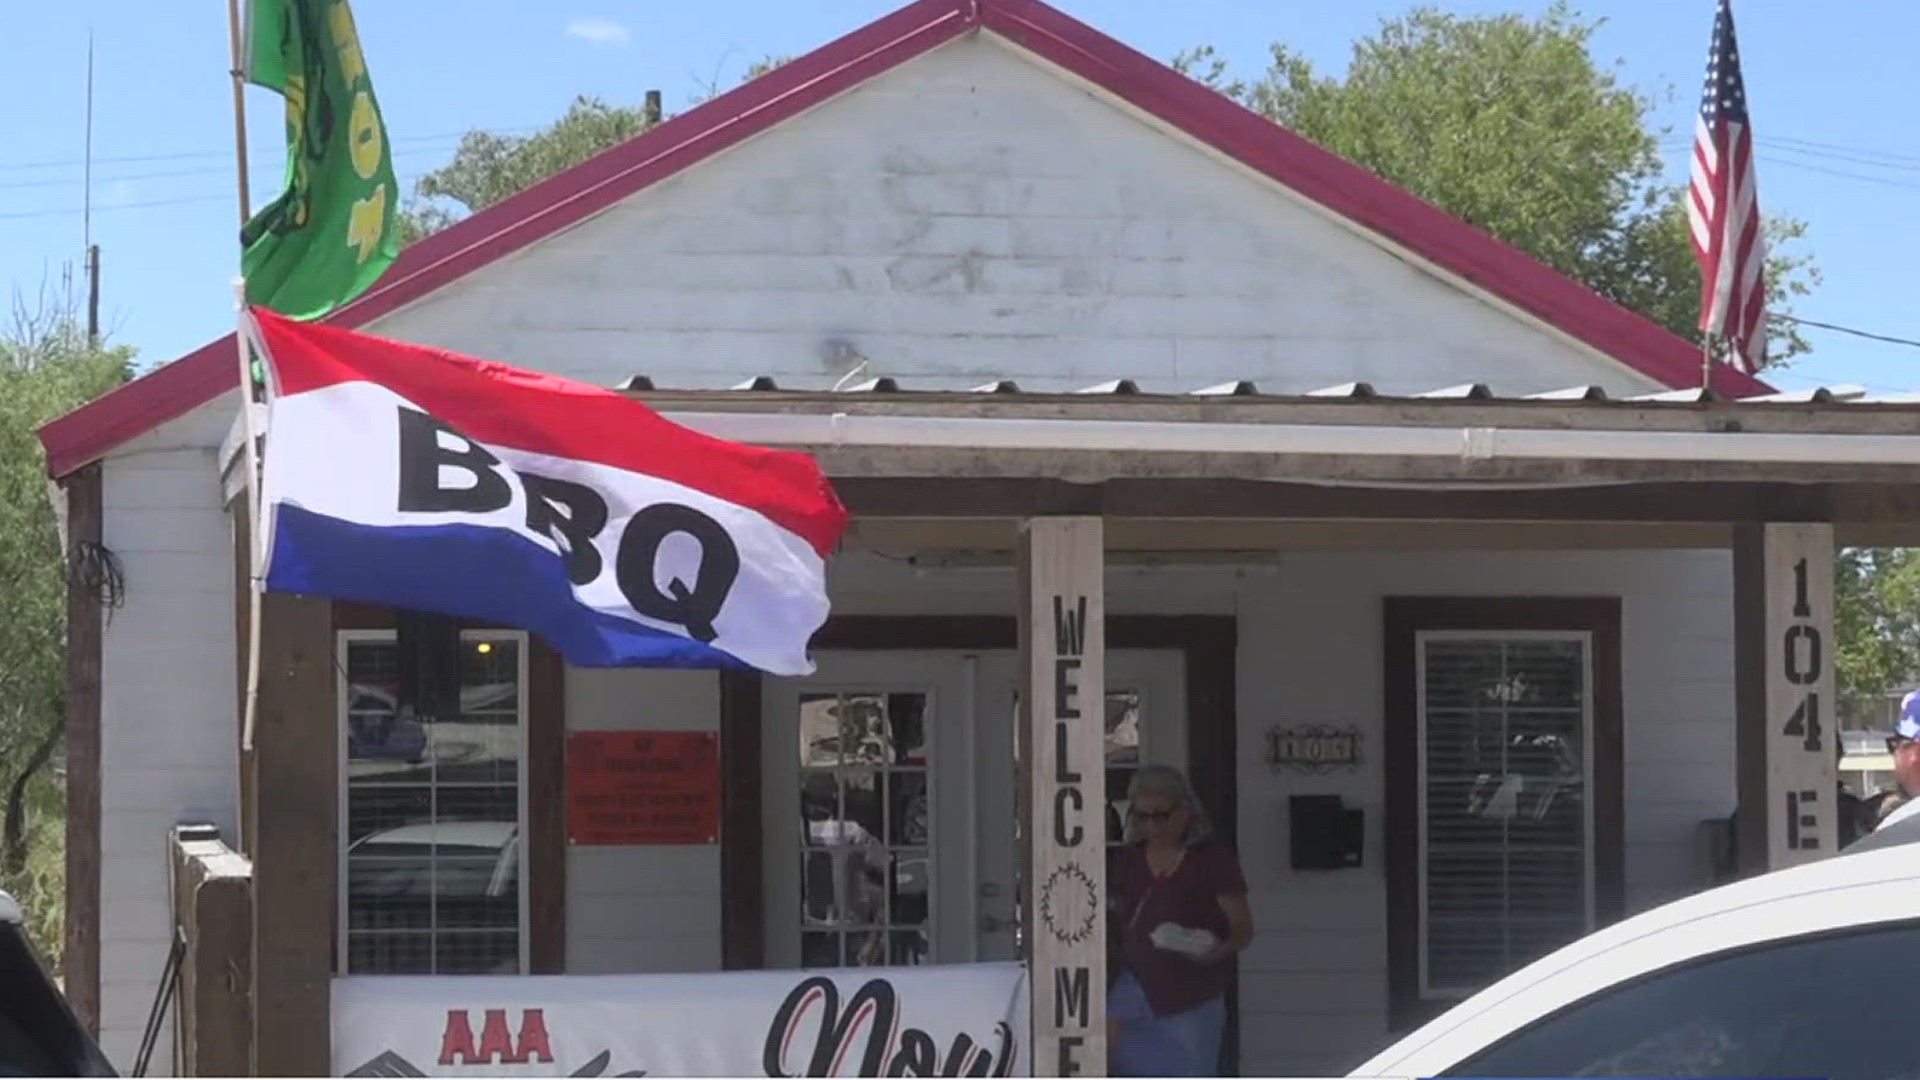 AAA BBQ grew out of their food truck in Kingsville and opened up a restaurant in the owner's hometown.